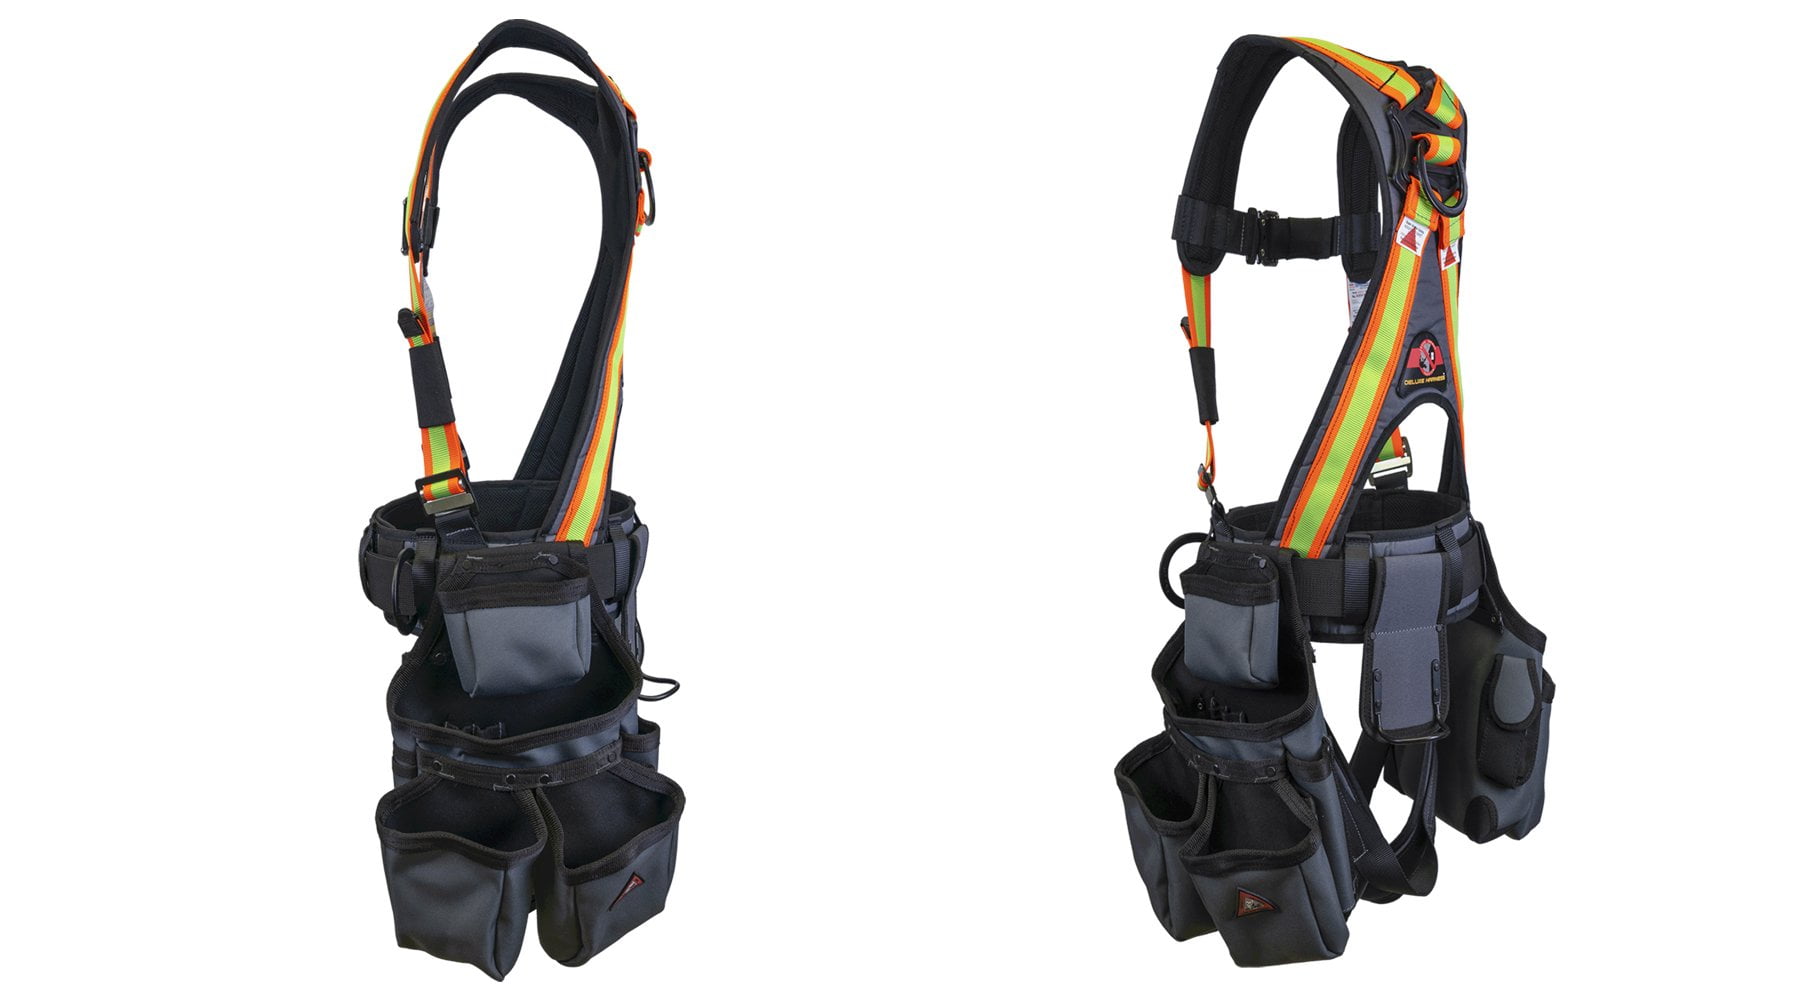 Super Anchor Safety 6151-RL Deluxe Full Body Harness plus All-Pakka Tool Bag Combo Large Red